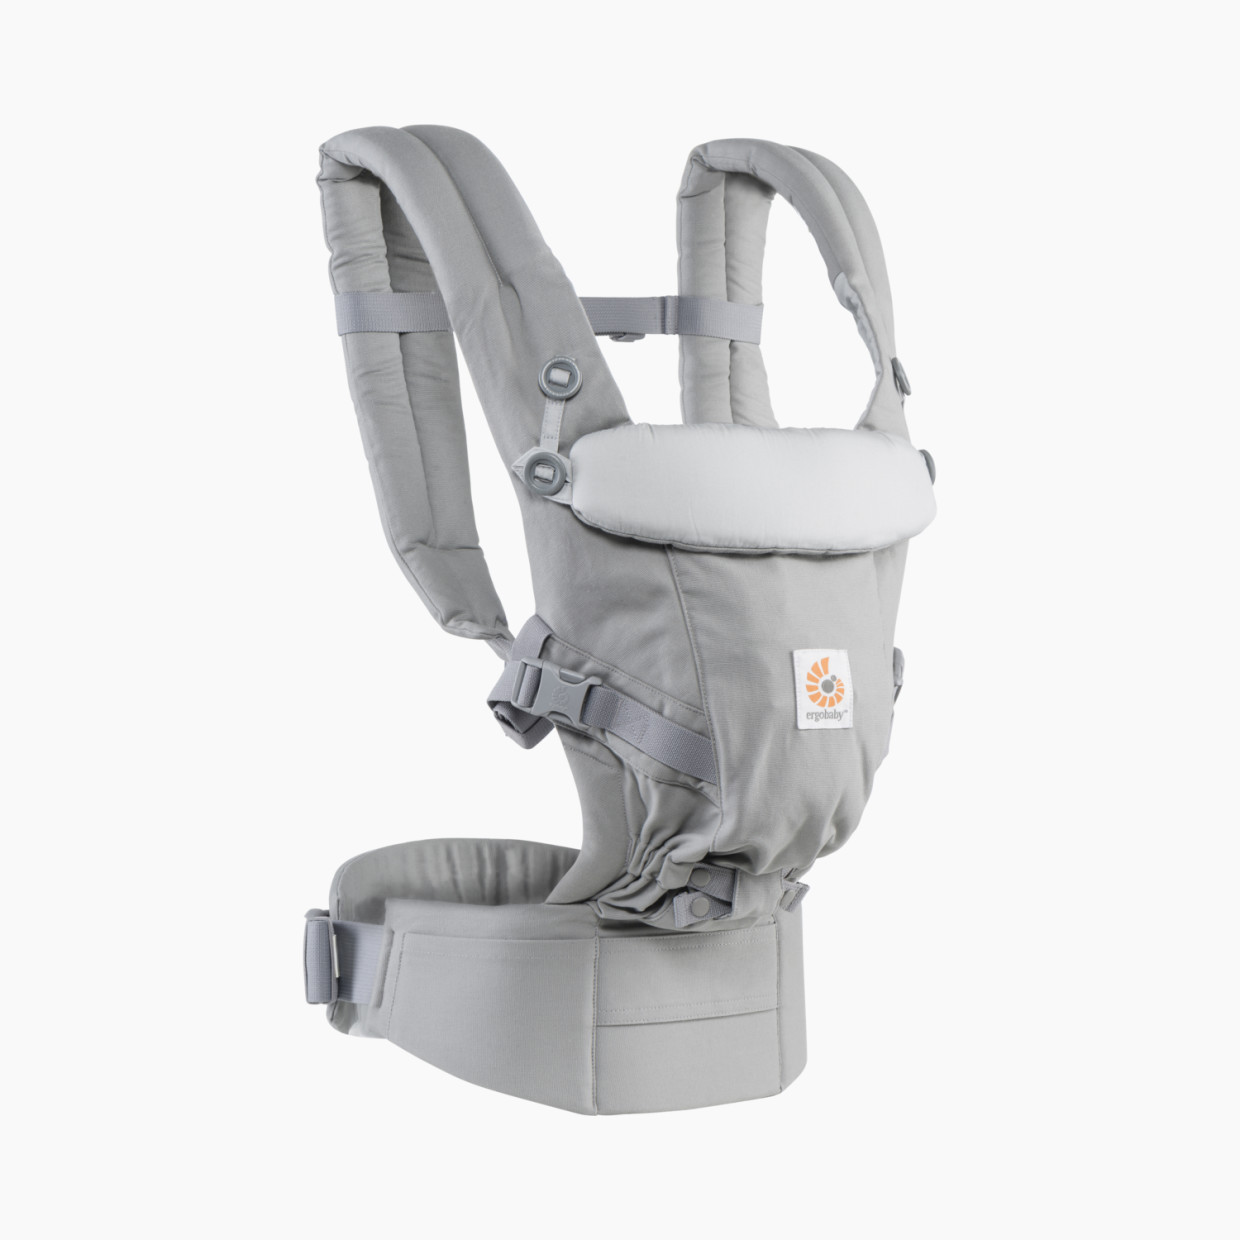 Ergobaby Adapt 3-Position Baby Carrier - Pearl Gray.